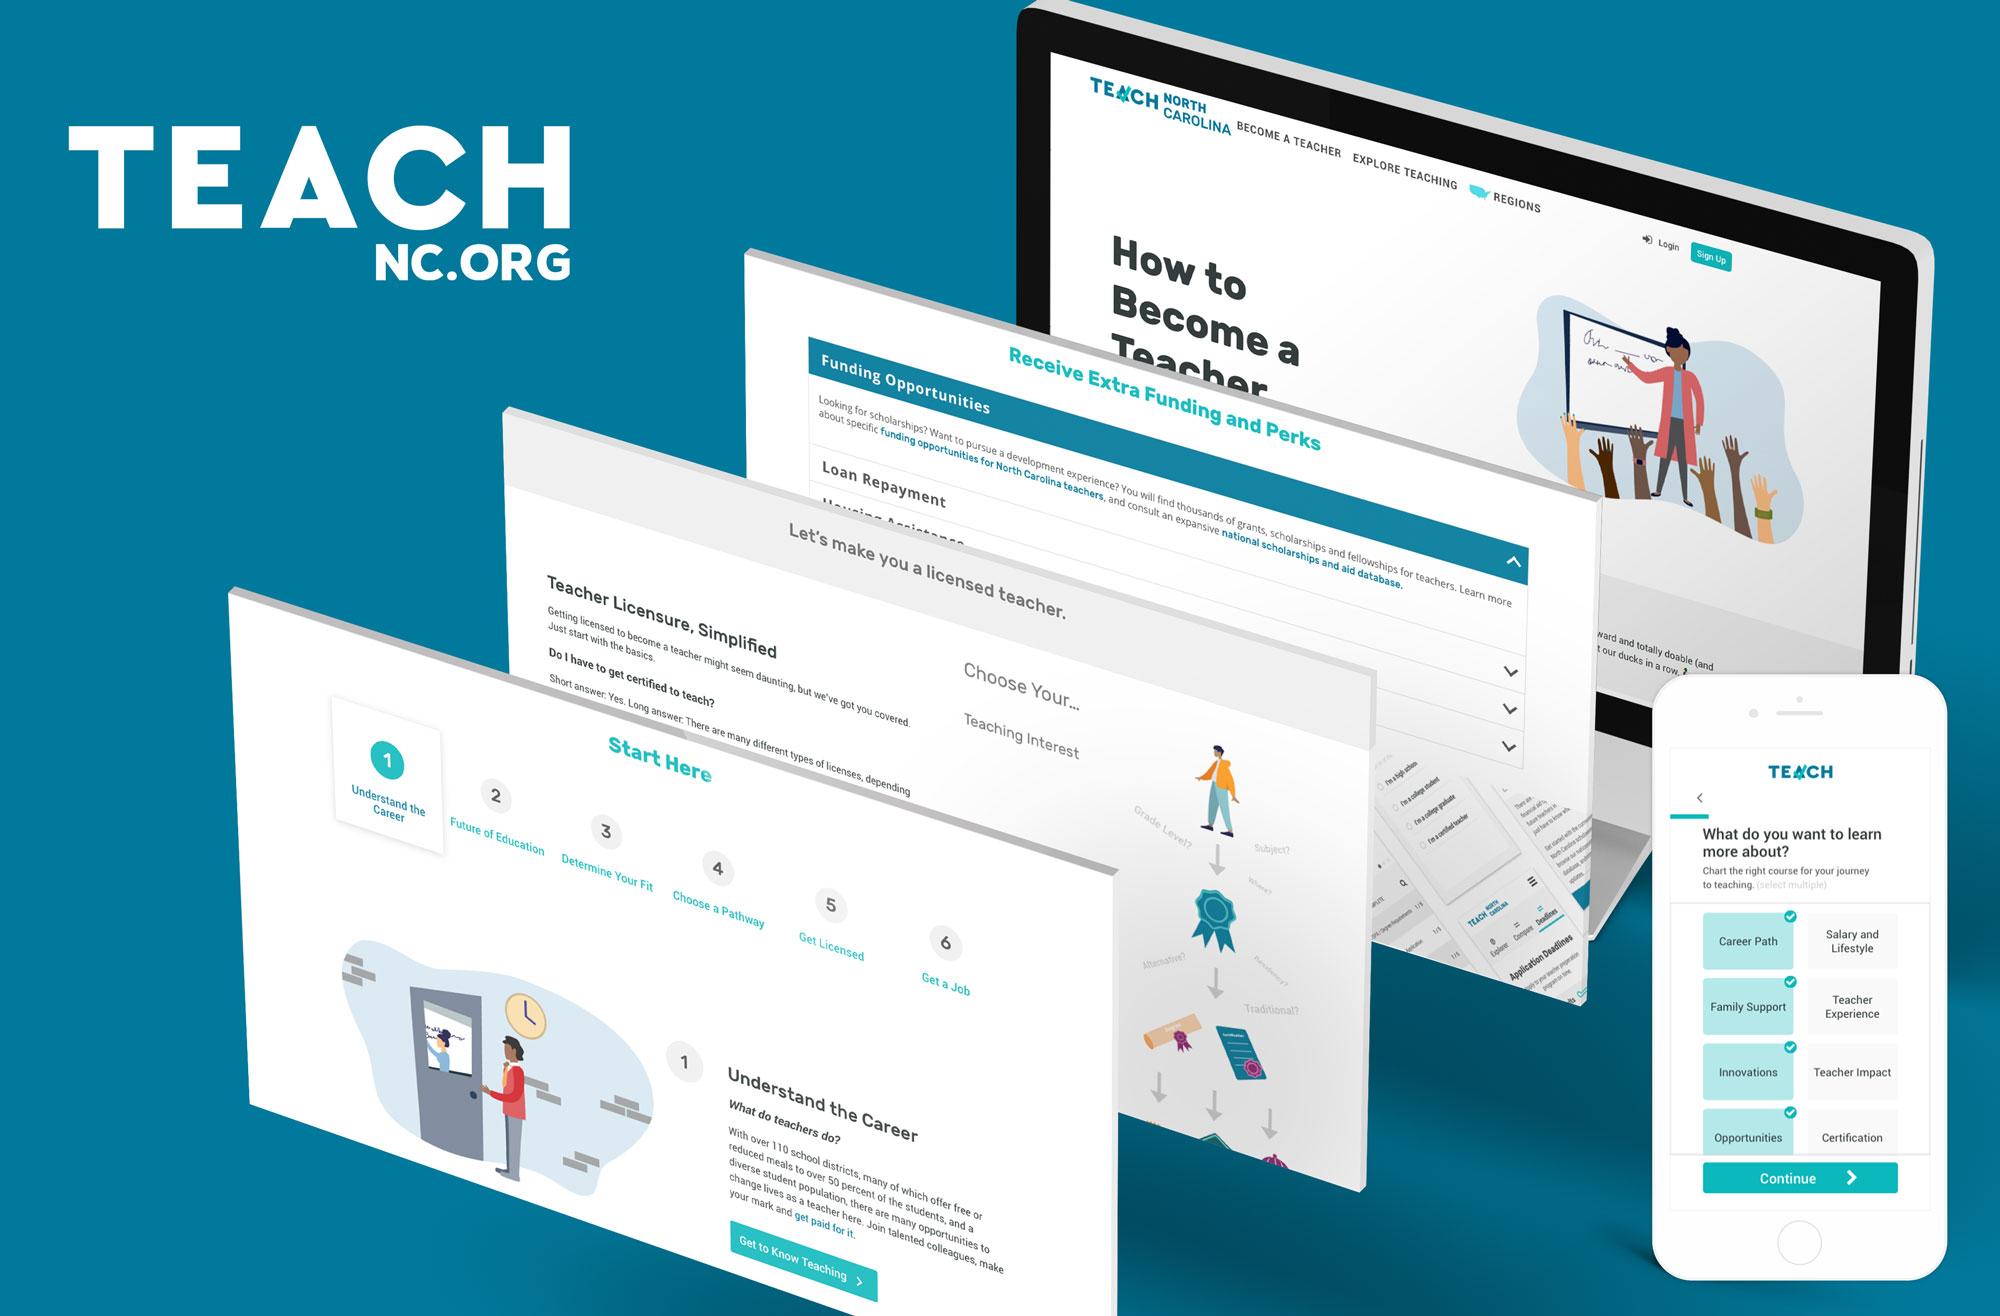 A series of TeachNC pages lined up one after the other, showing tools and support to become a North Carolina licensed teacher. The first page highlights “Understand the Career,” the second says, “Let’s make you a licensed teacher,” the third says, “Receive extra funding and perks” and the fourth says, “How to Become a Teacher.” In front of these screens, a small box asks, “What do you want to learn more about?”